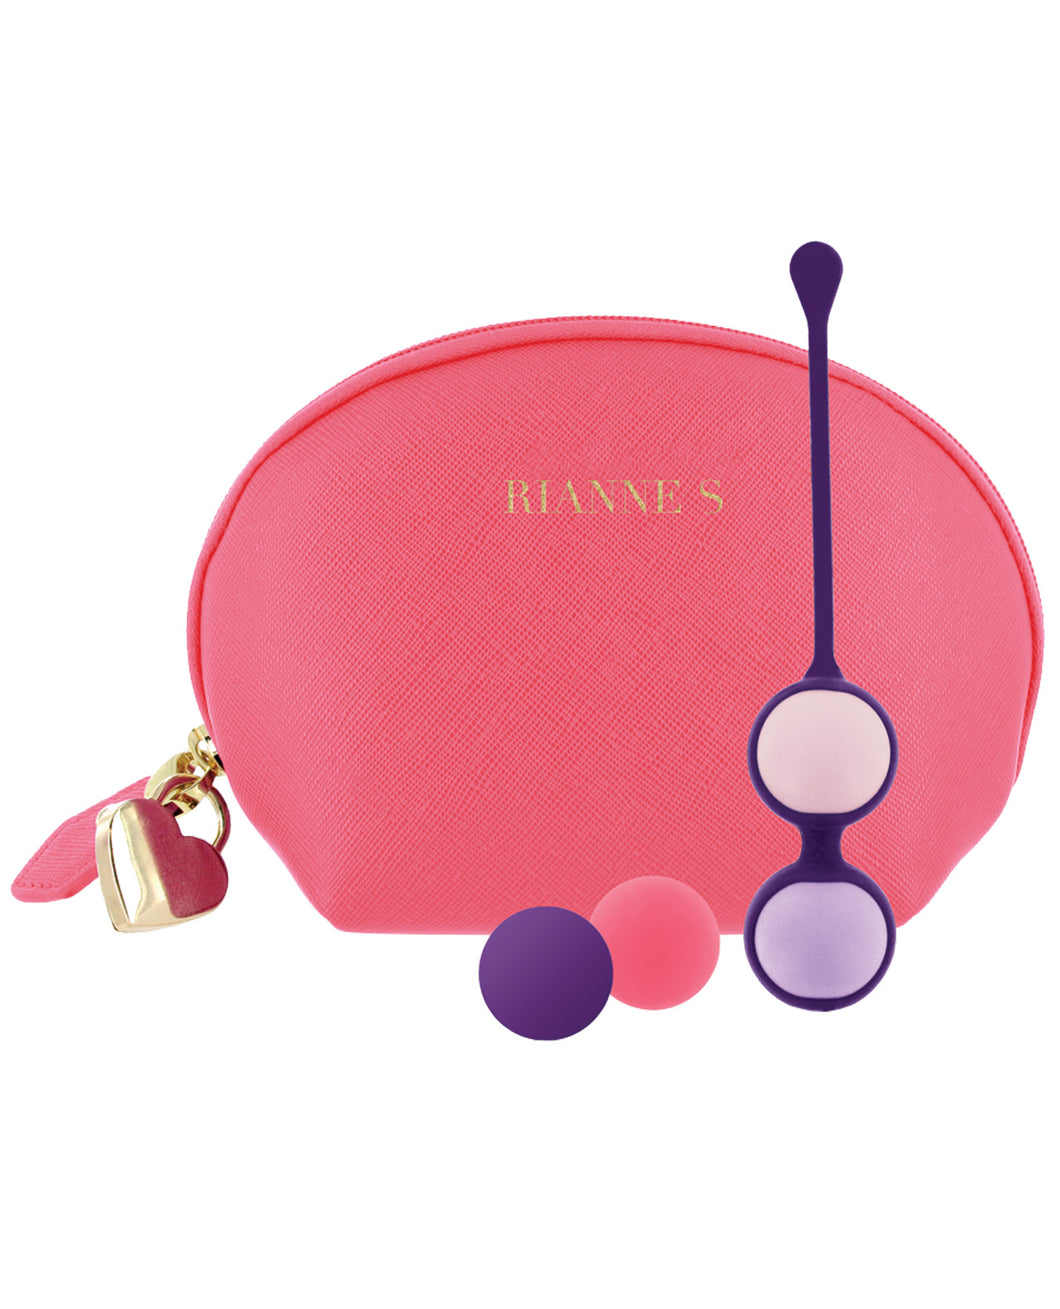 Rianne S Pussy Playballs W-cosmetic Case - Coral Rose